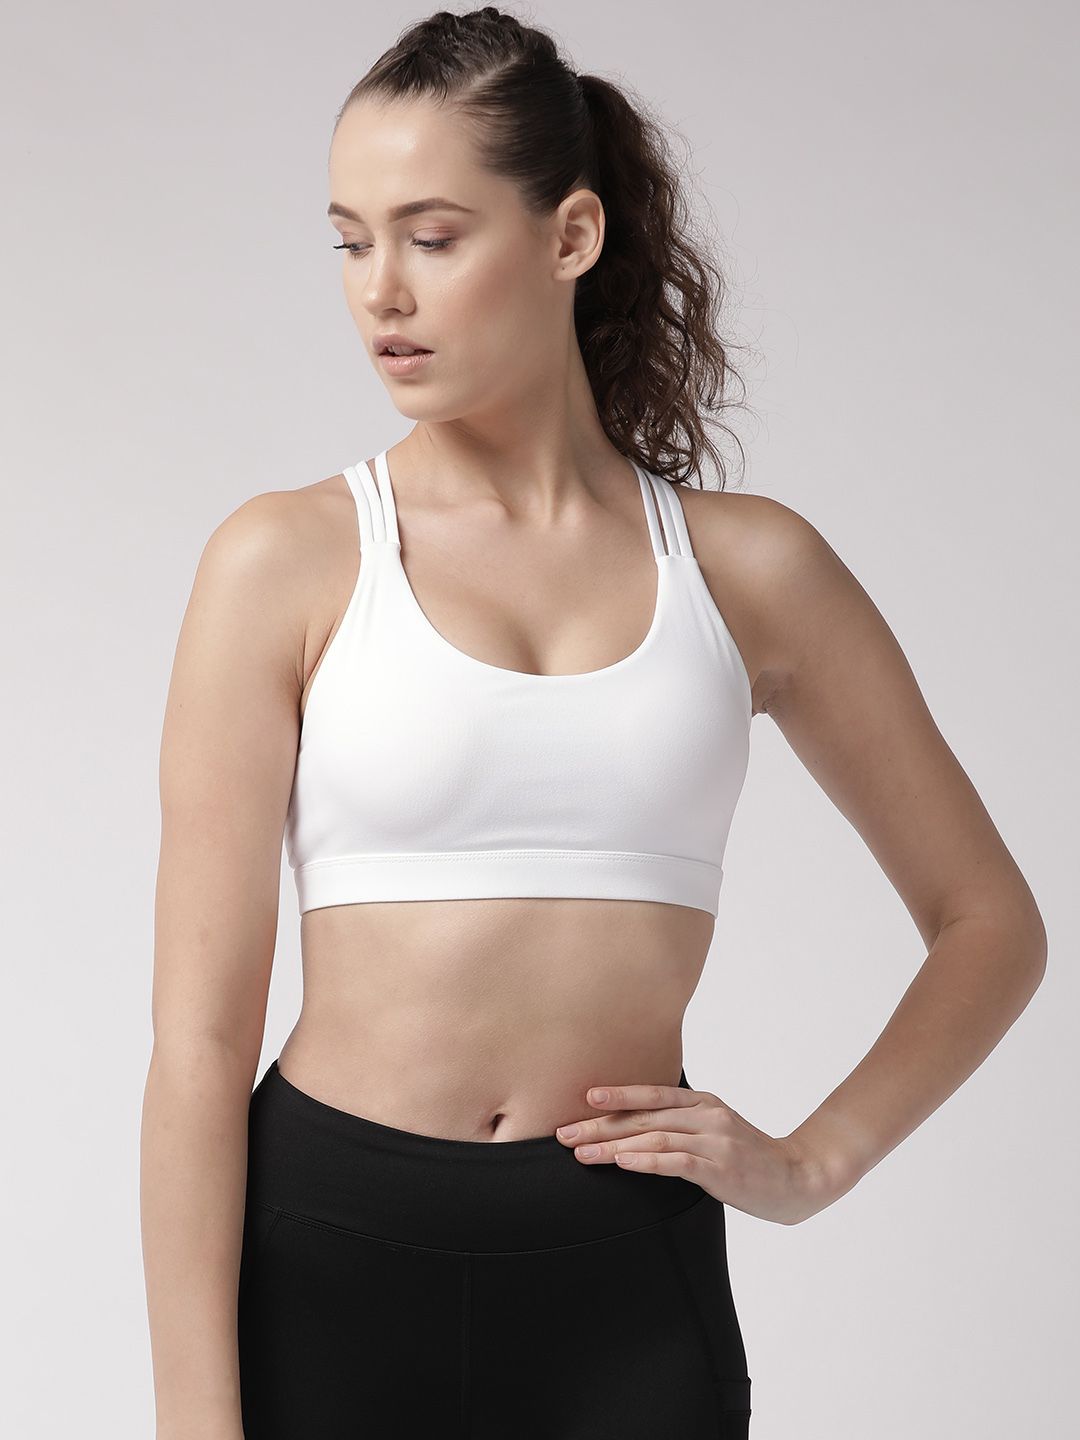 Fitkin White Solid Non-Wired Lightly Padded Sports Bra B13 Price in India